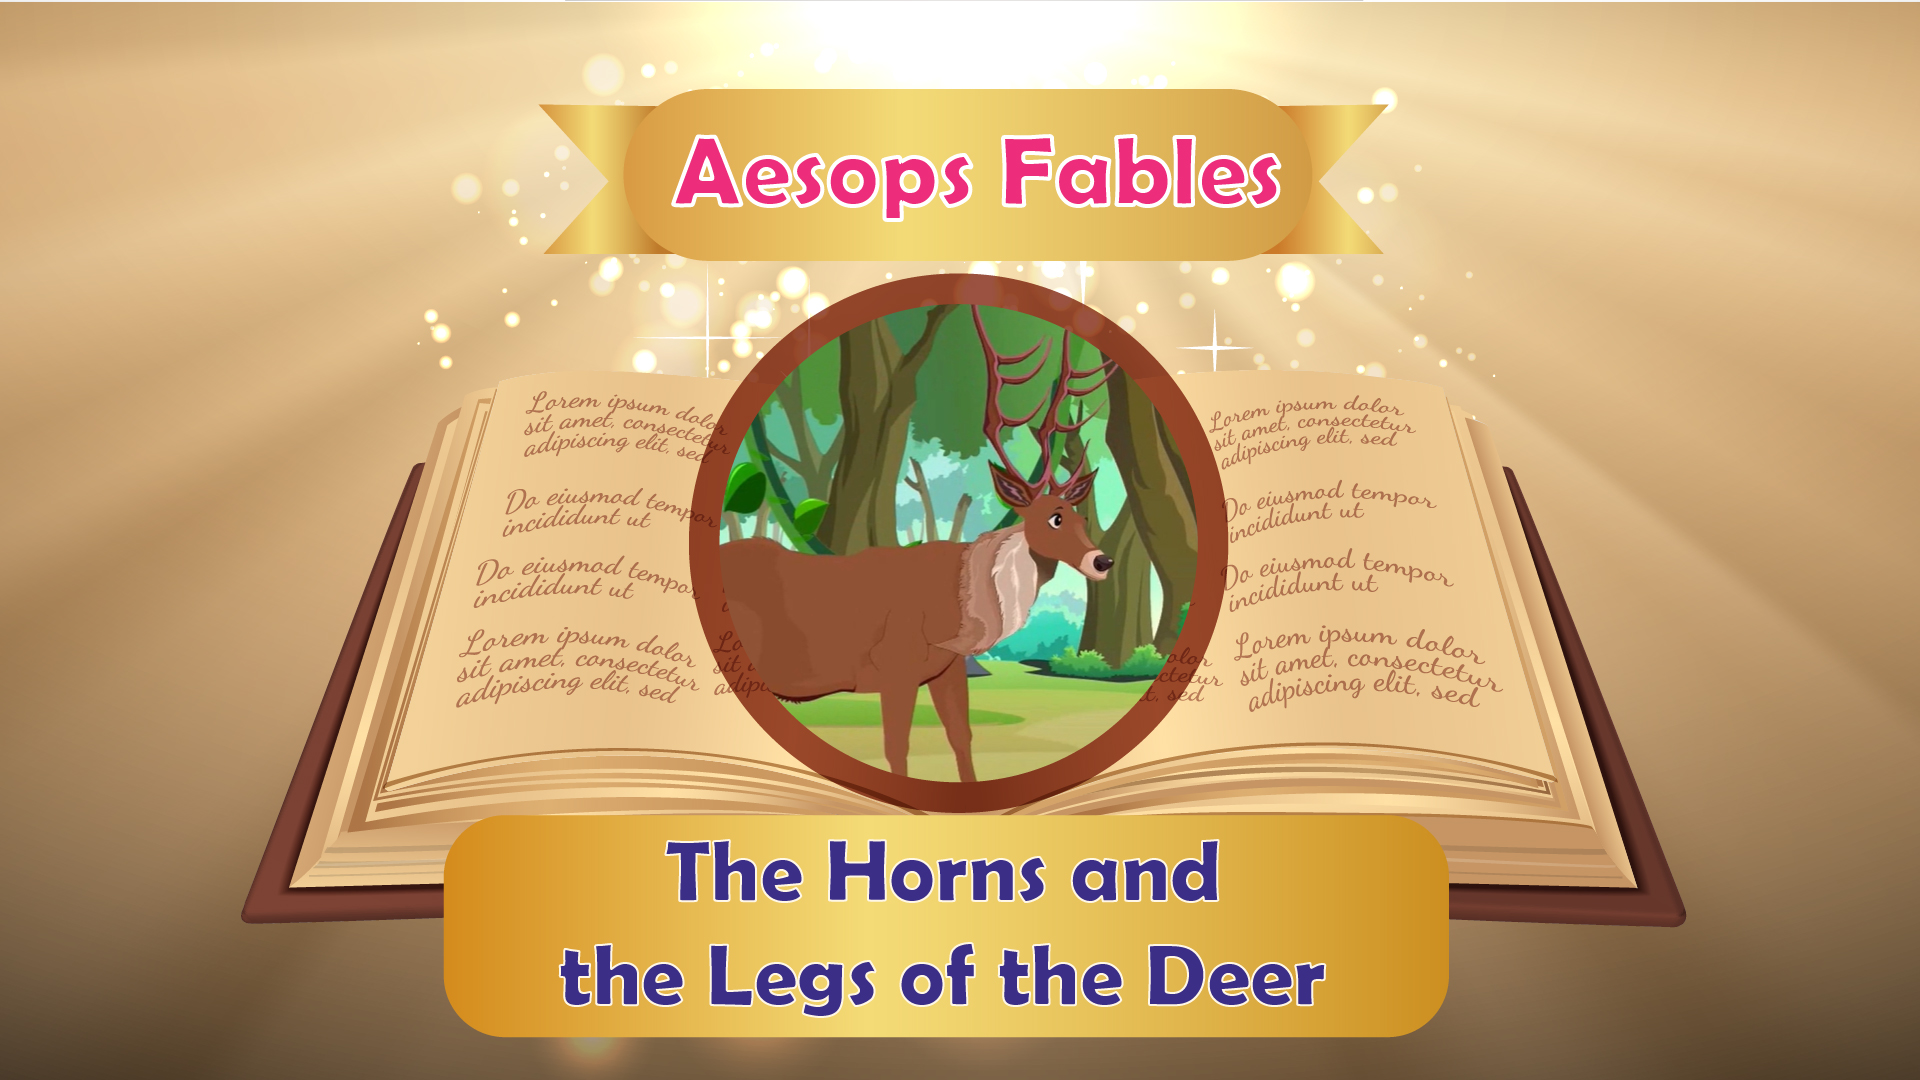 The Horns and Legs of the Deer